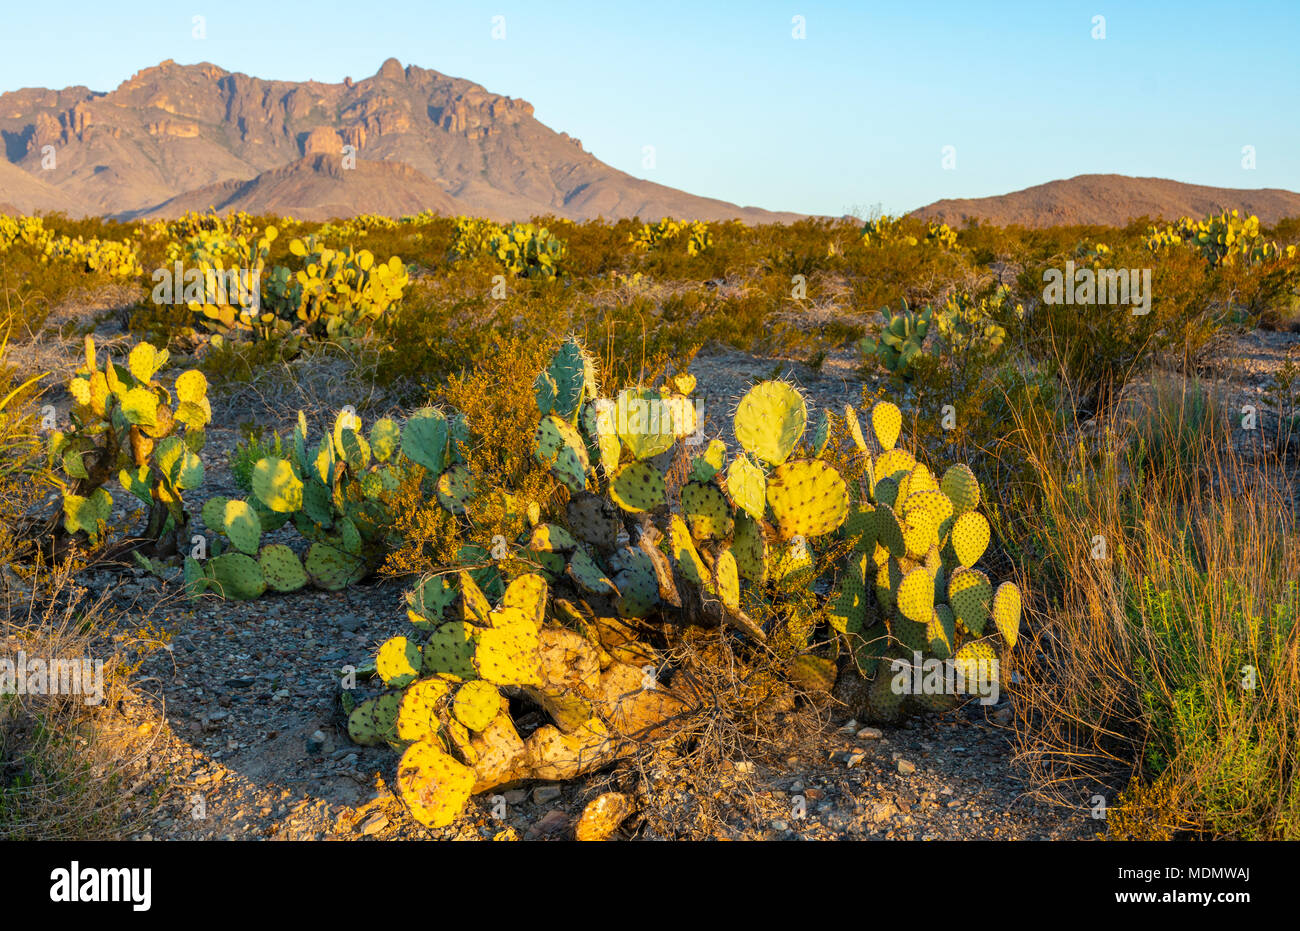 Texas, Big Bend National Park, Dugout Wells, Chihuahuan Desert Nature Trail, cactus, Chisos Mountains Stock Photo